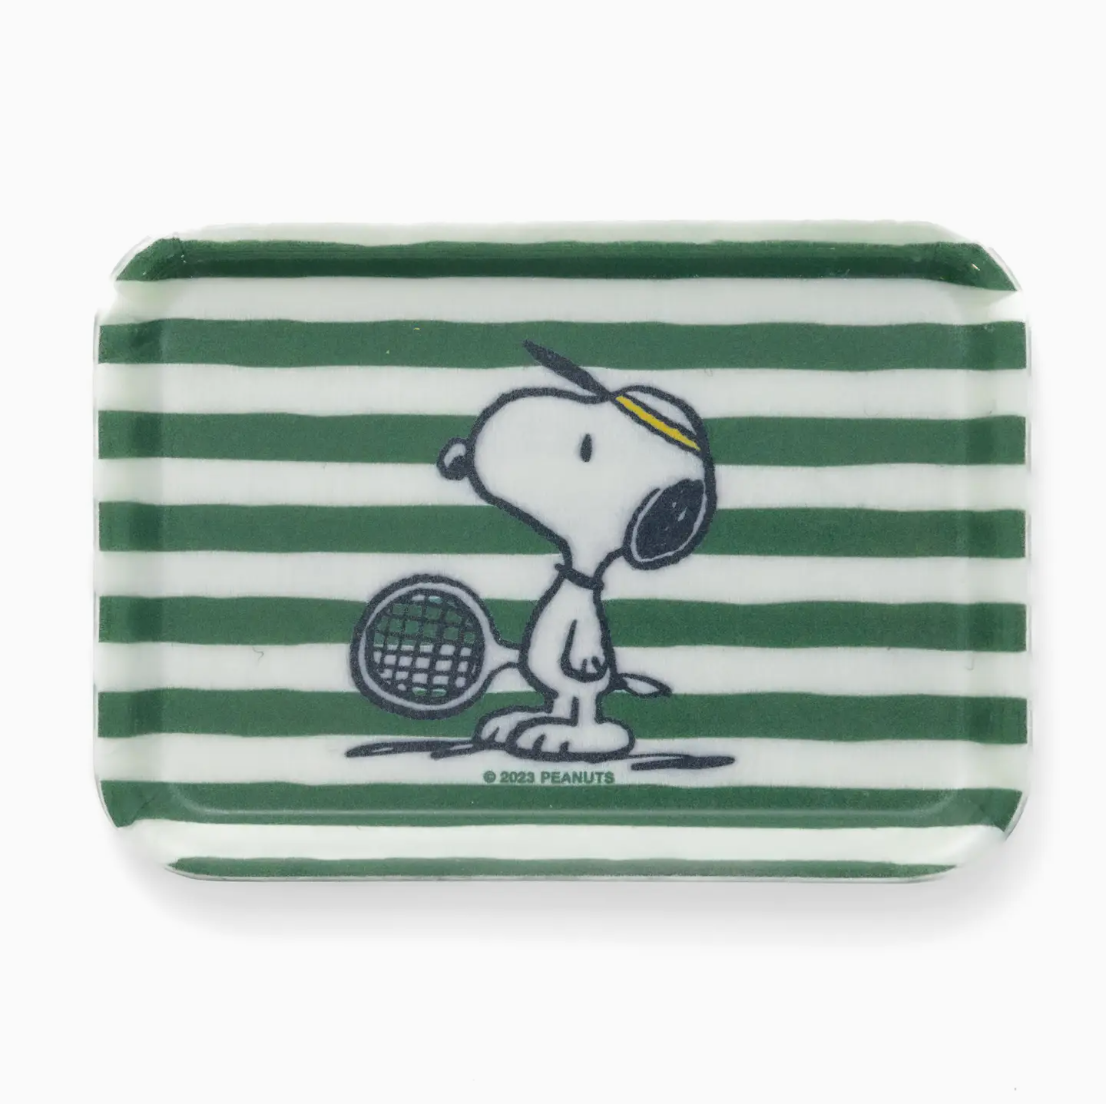 A Peanuts Tray featuring a design of Snoopy from Peanuts, holding a tennis racket, printed on a green and white striped background, inspired by the bungalow style.